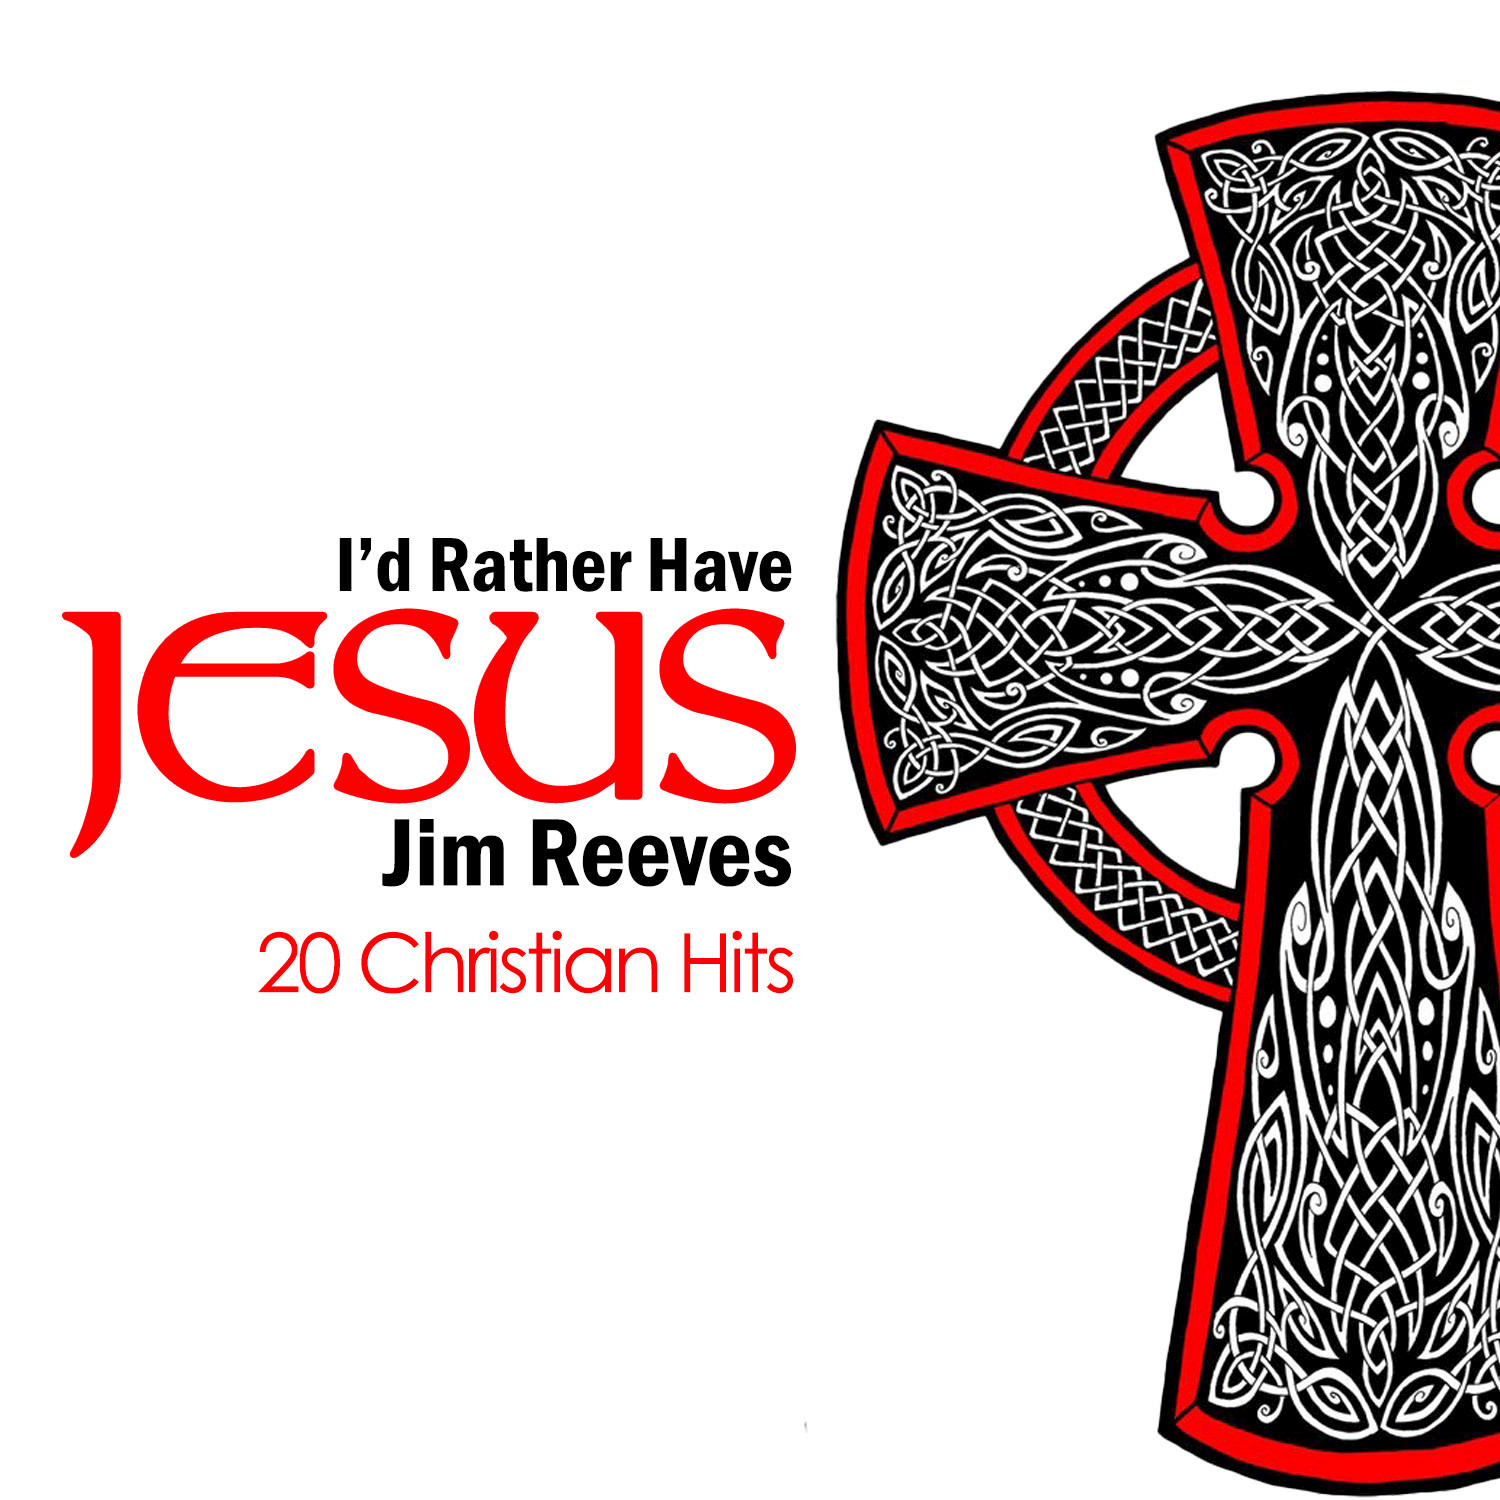 I'd Rather Have Jesus - 20 Christian Hits